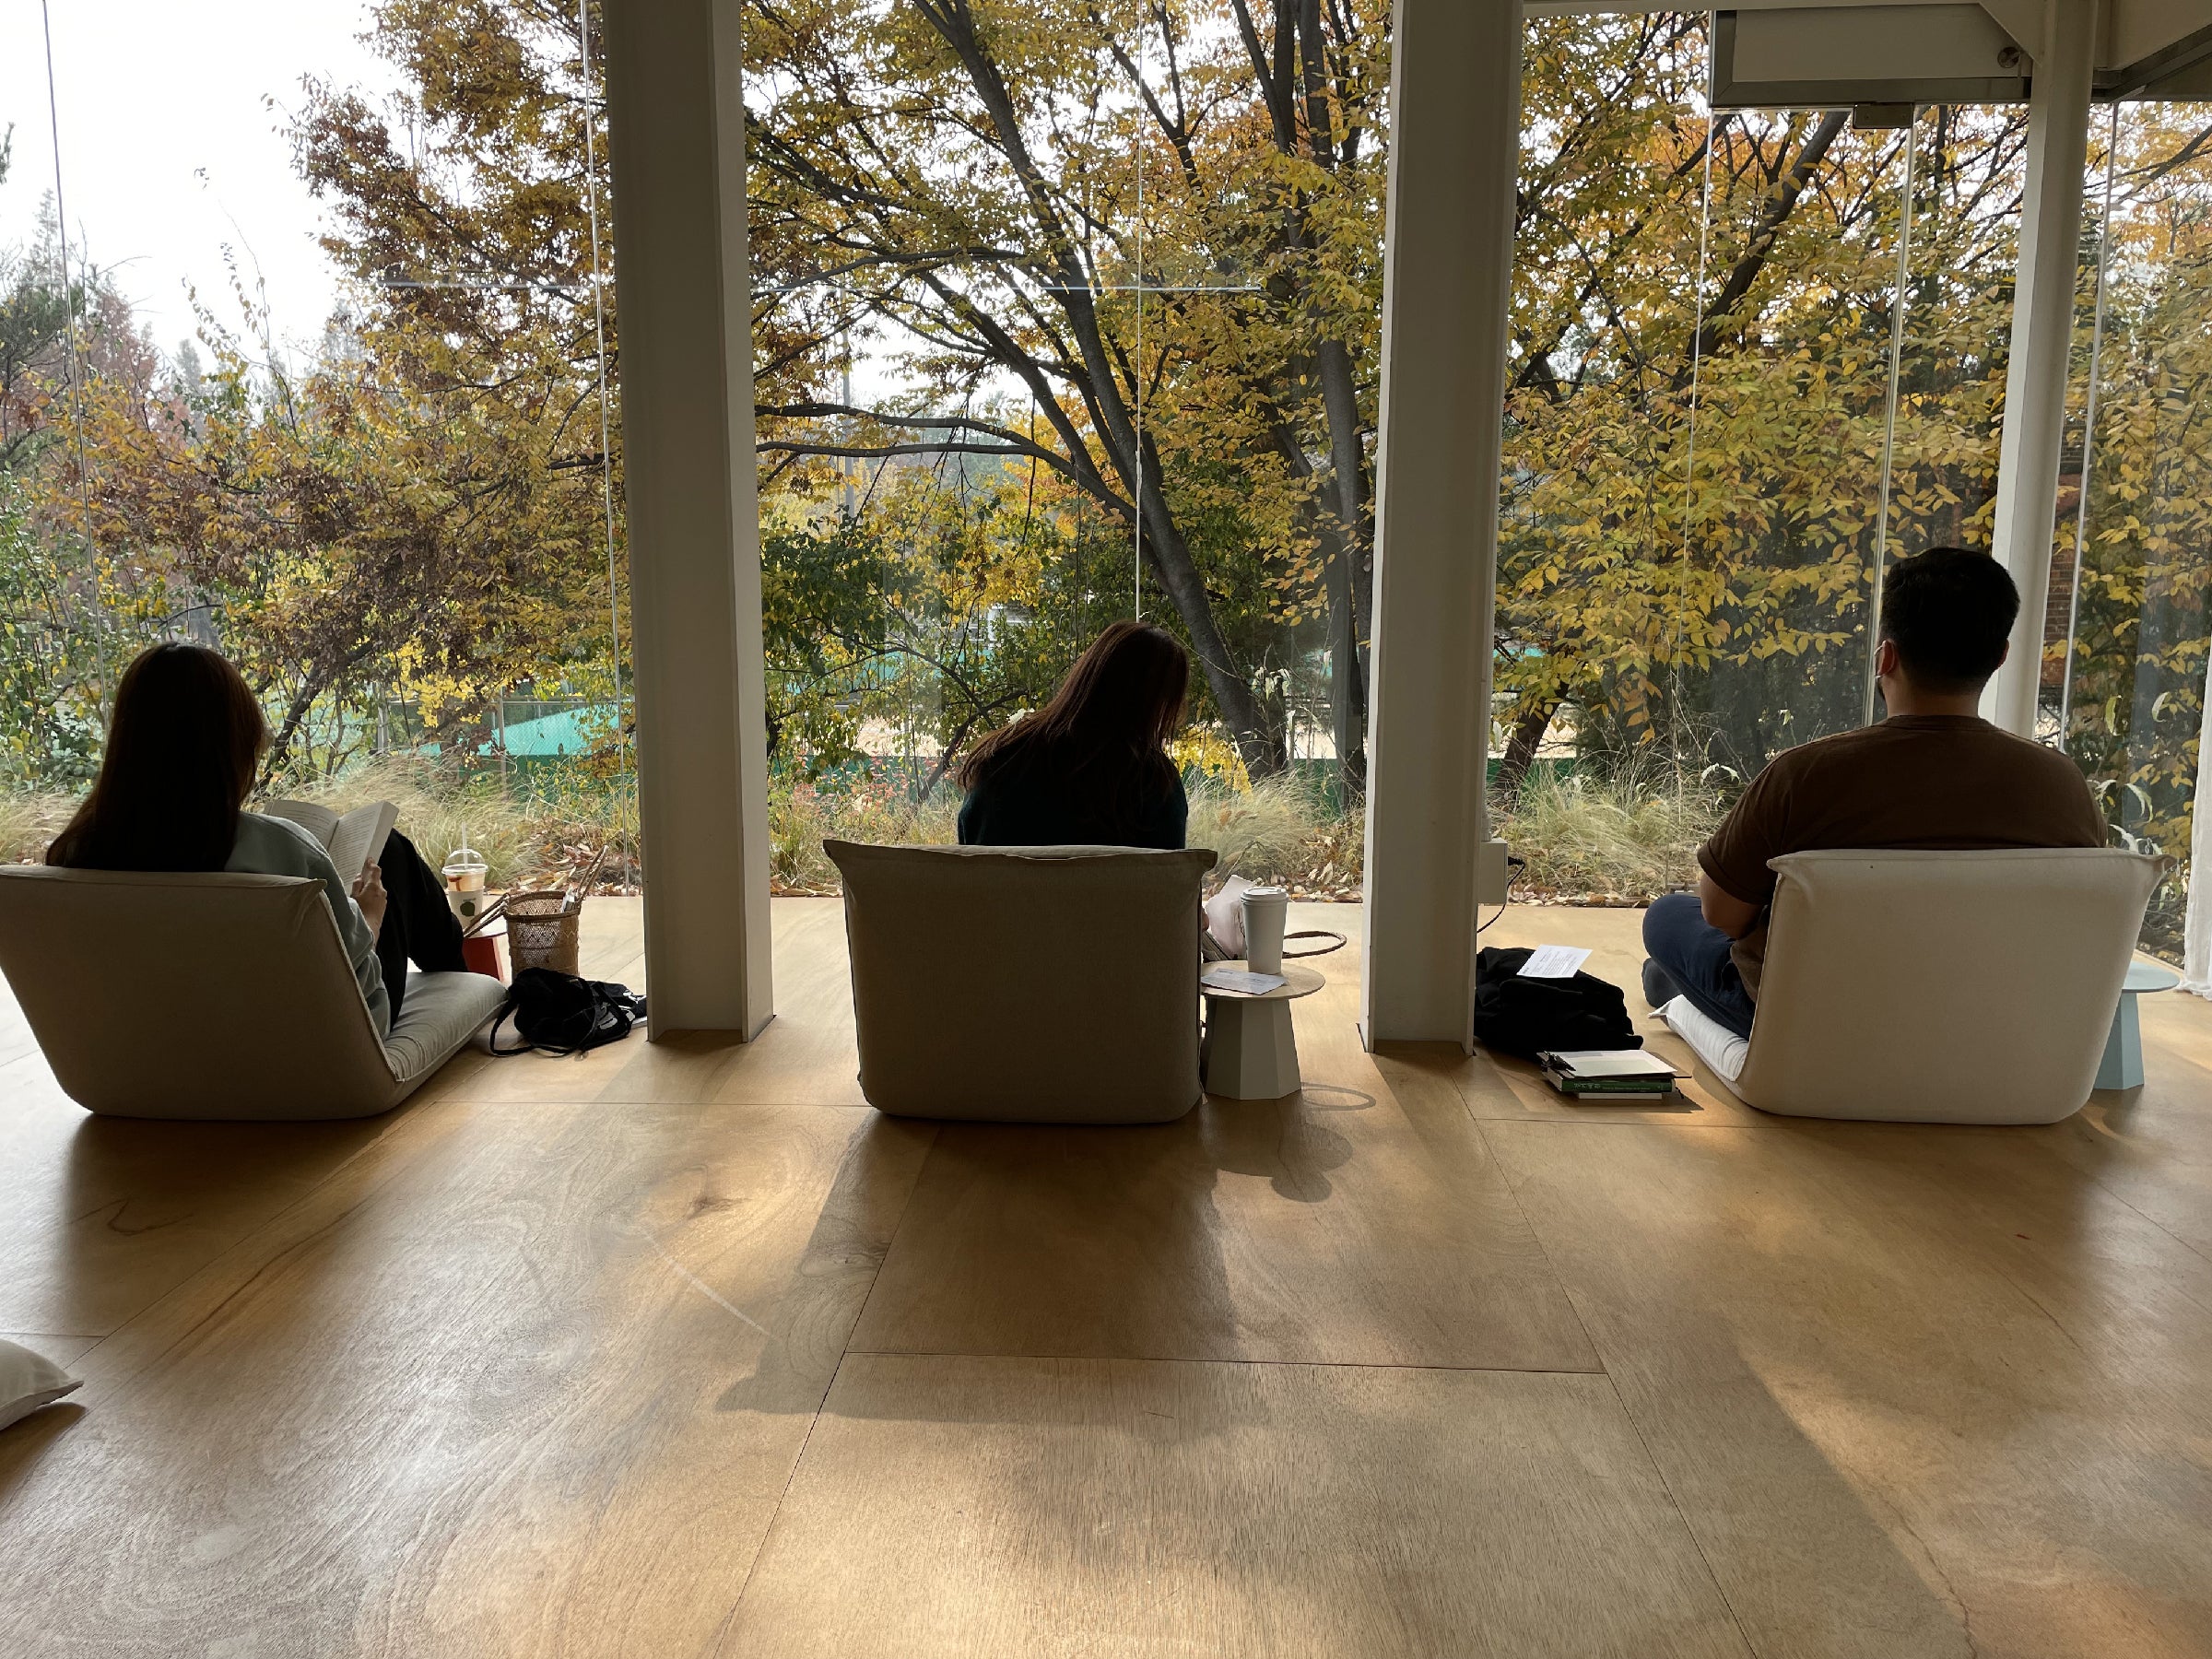 Customers enjoy sitting in silence at Green Lab cafe, South Korea